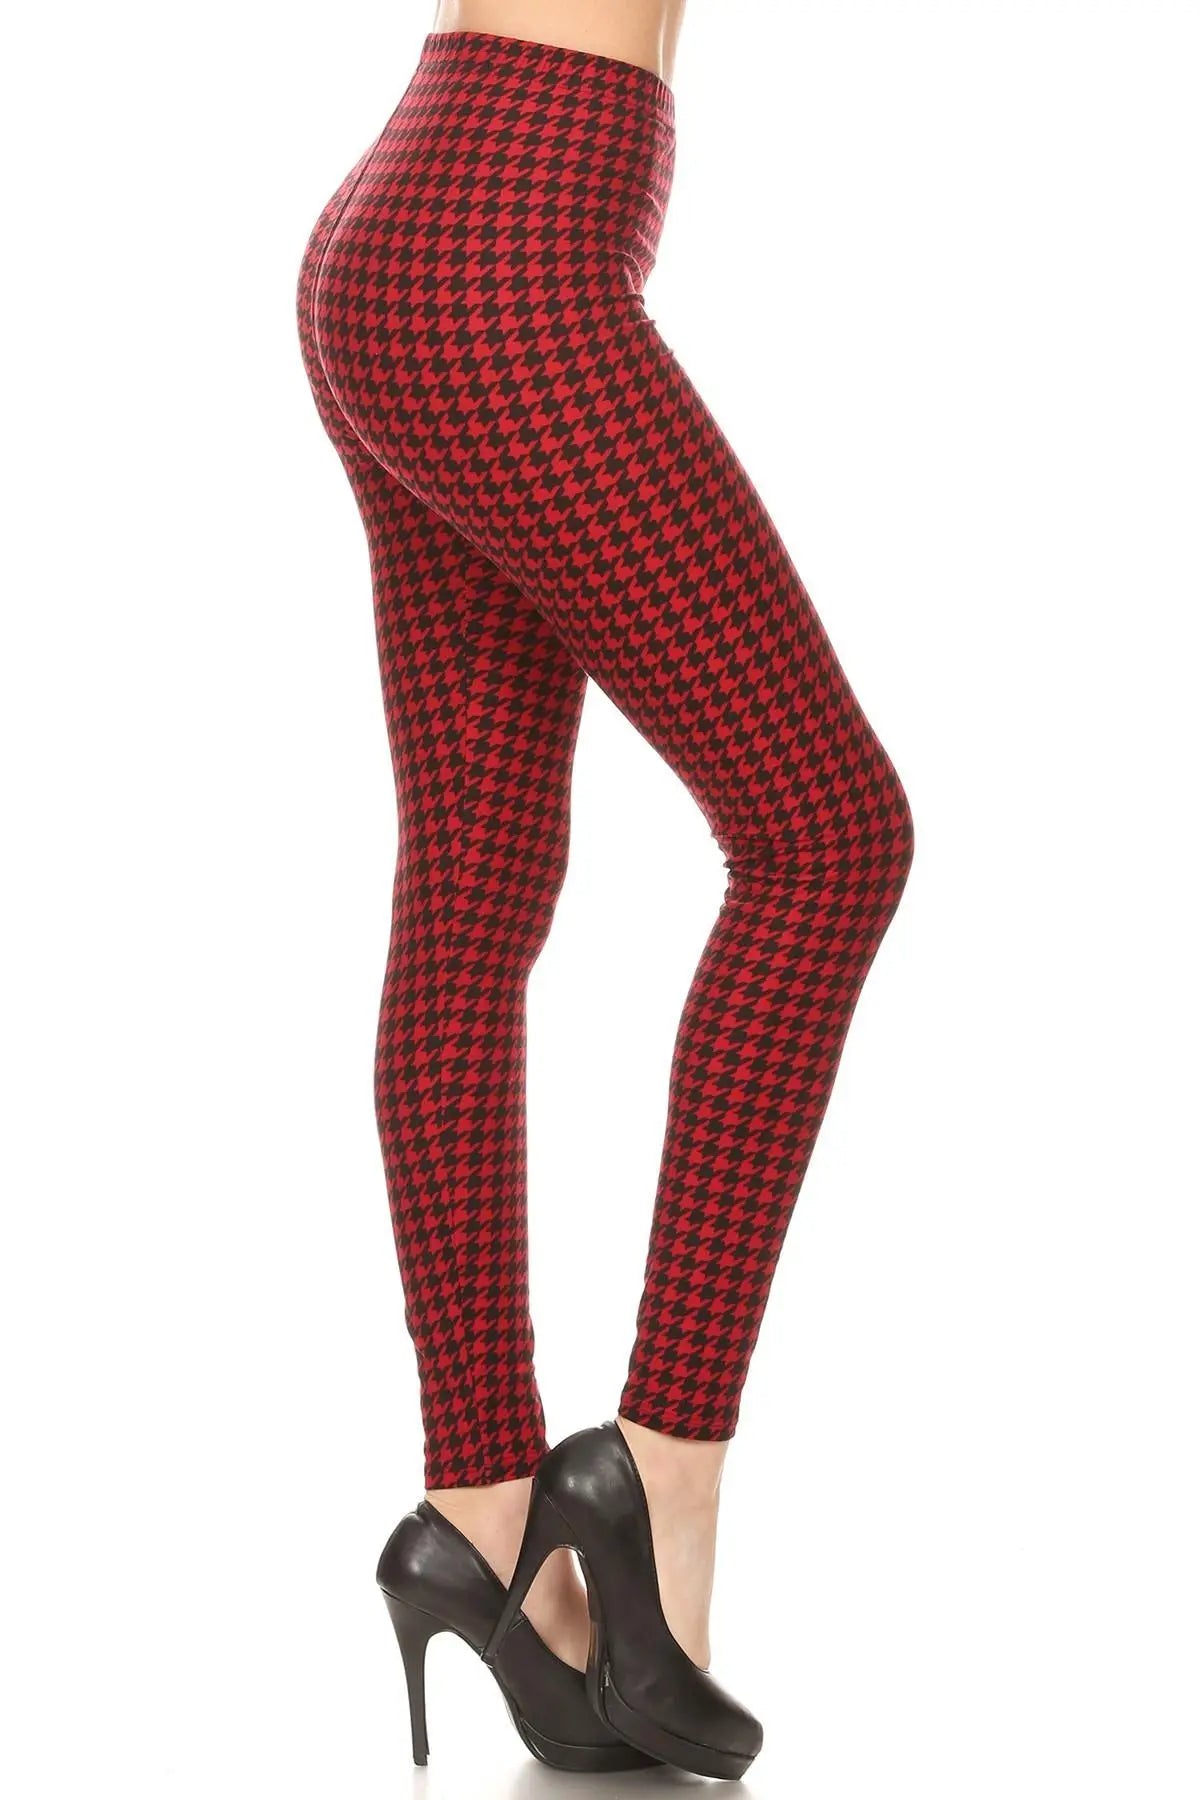 Hounds Tooth Print, High Rise, Fitted Leggings, With An Elastic Waistband Sunny EvE Fashion